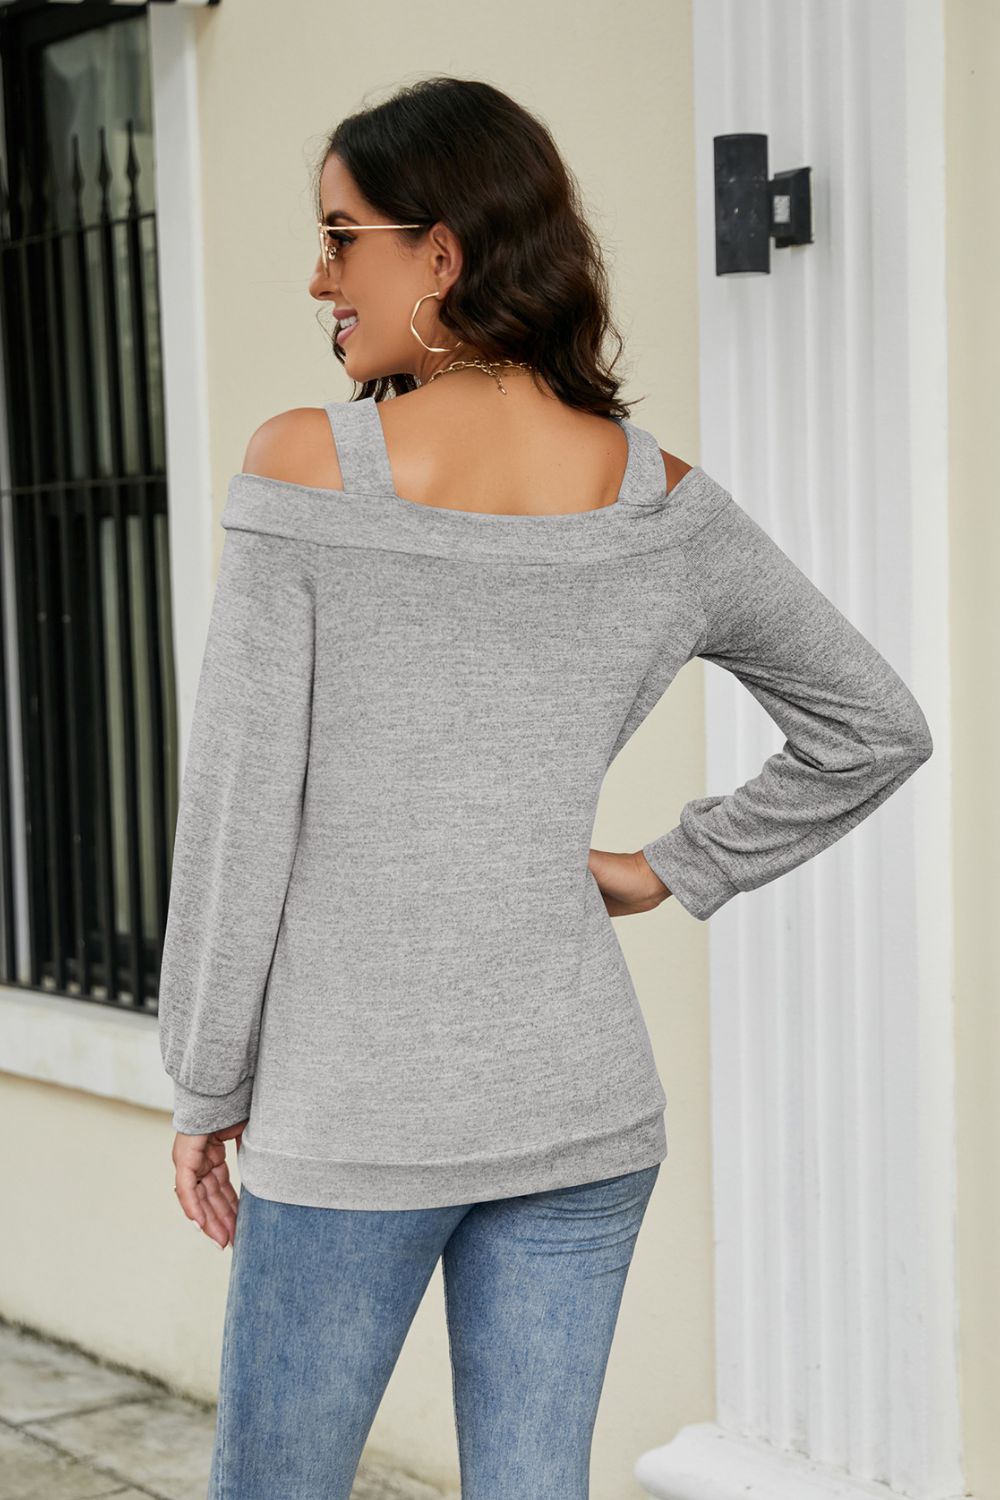 Cutout Cold-Shoulder Top - gray cold shoulder long sleeve top with square neckline. Firefly Lane Boutique1